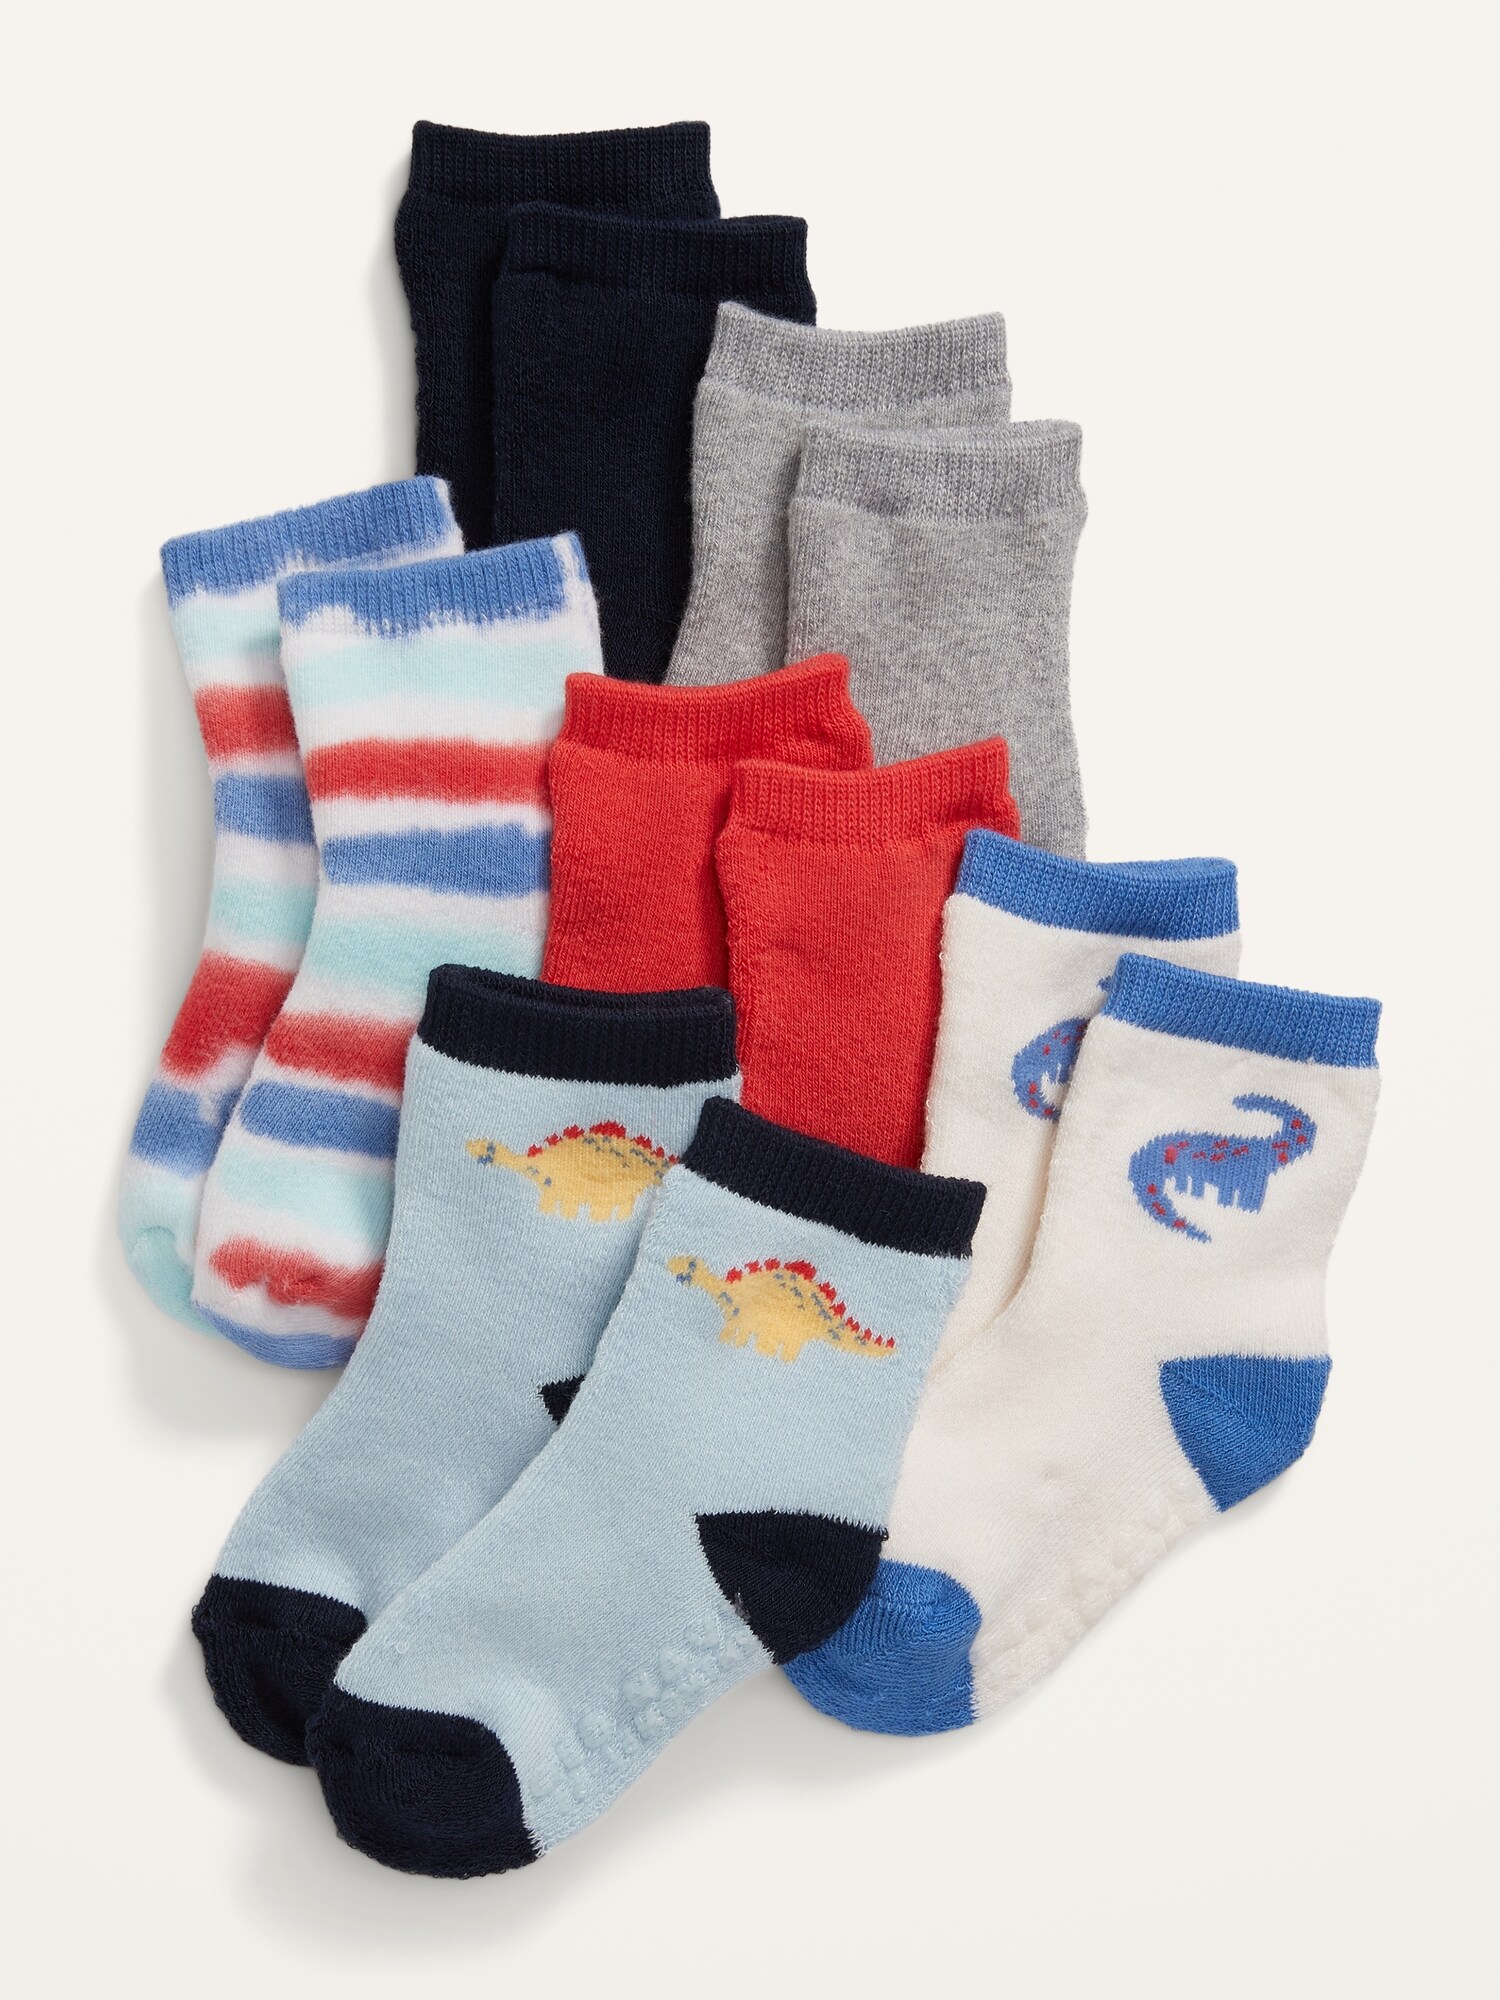 Unisex Printed Ankle Socks 6-Pack for Baby